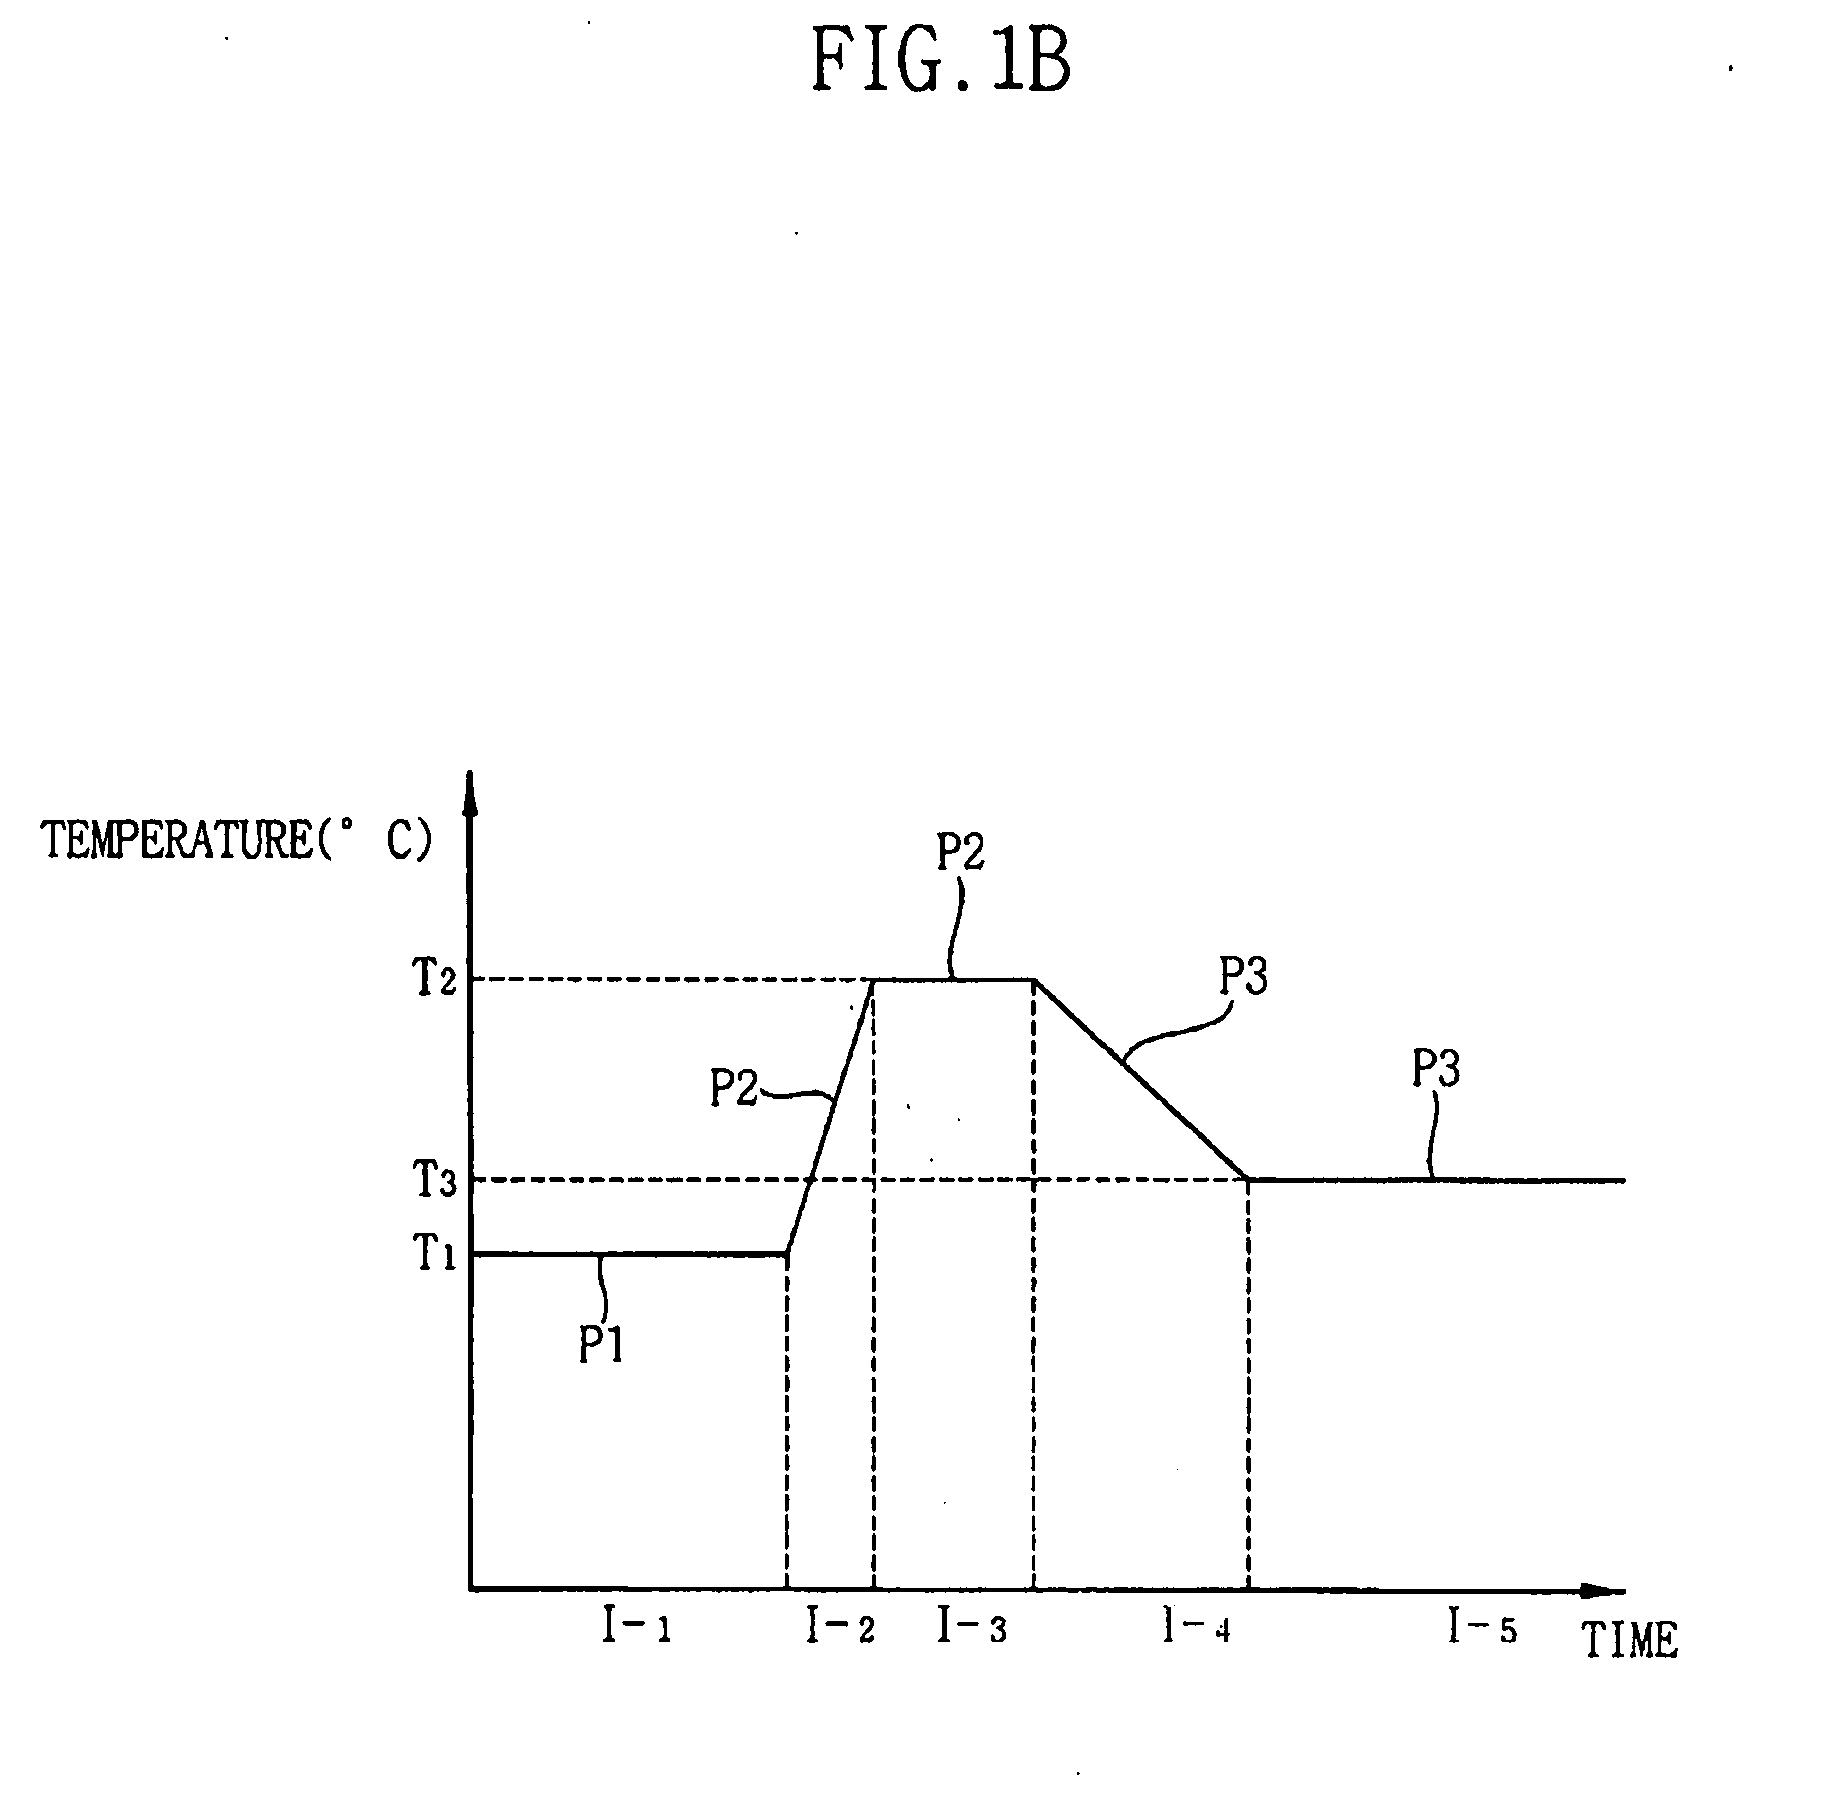 Method of forming an oxinitride layer